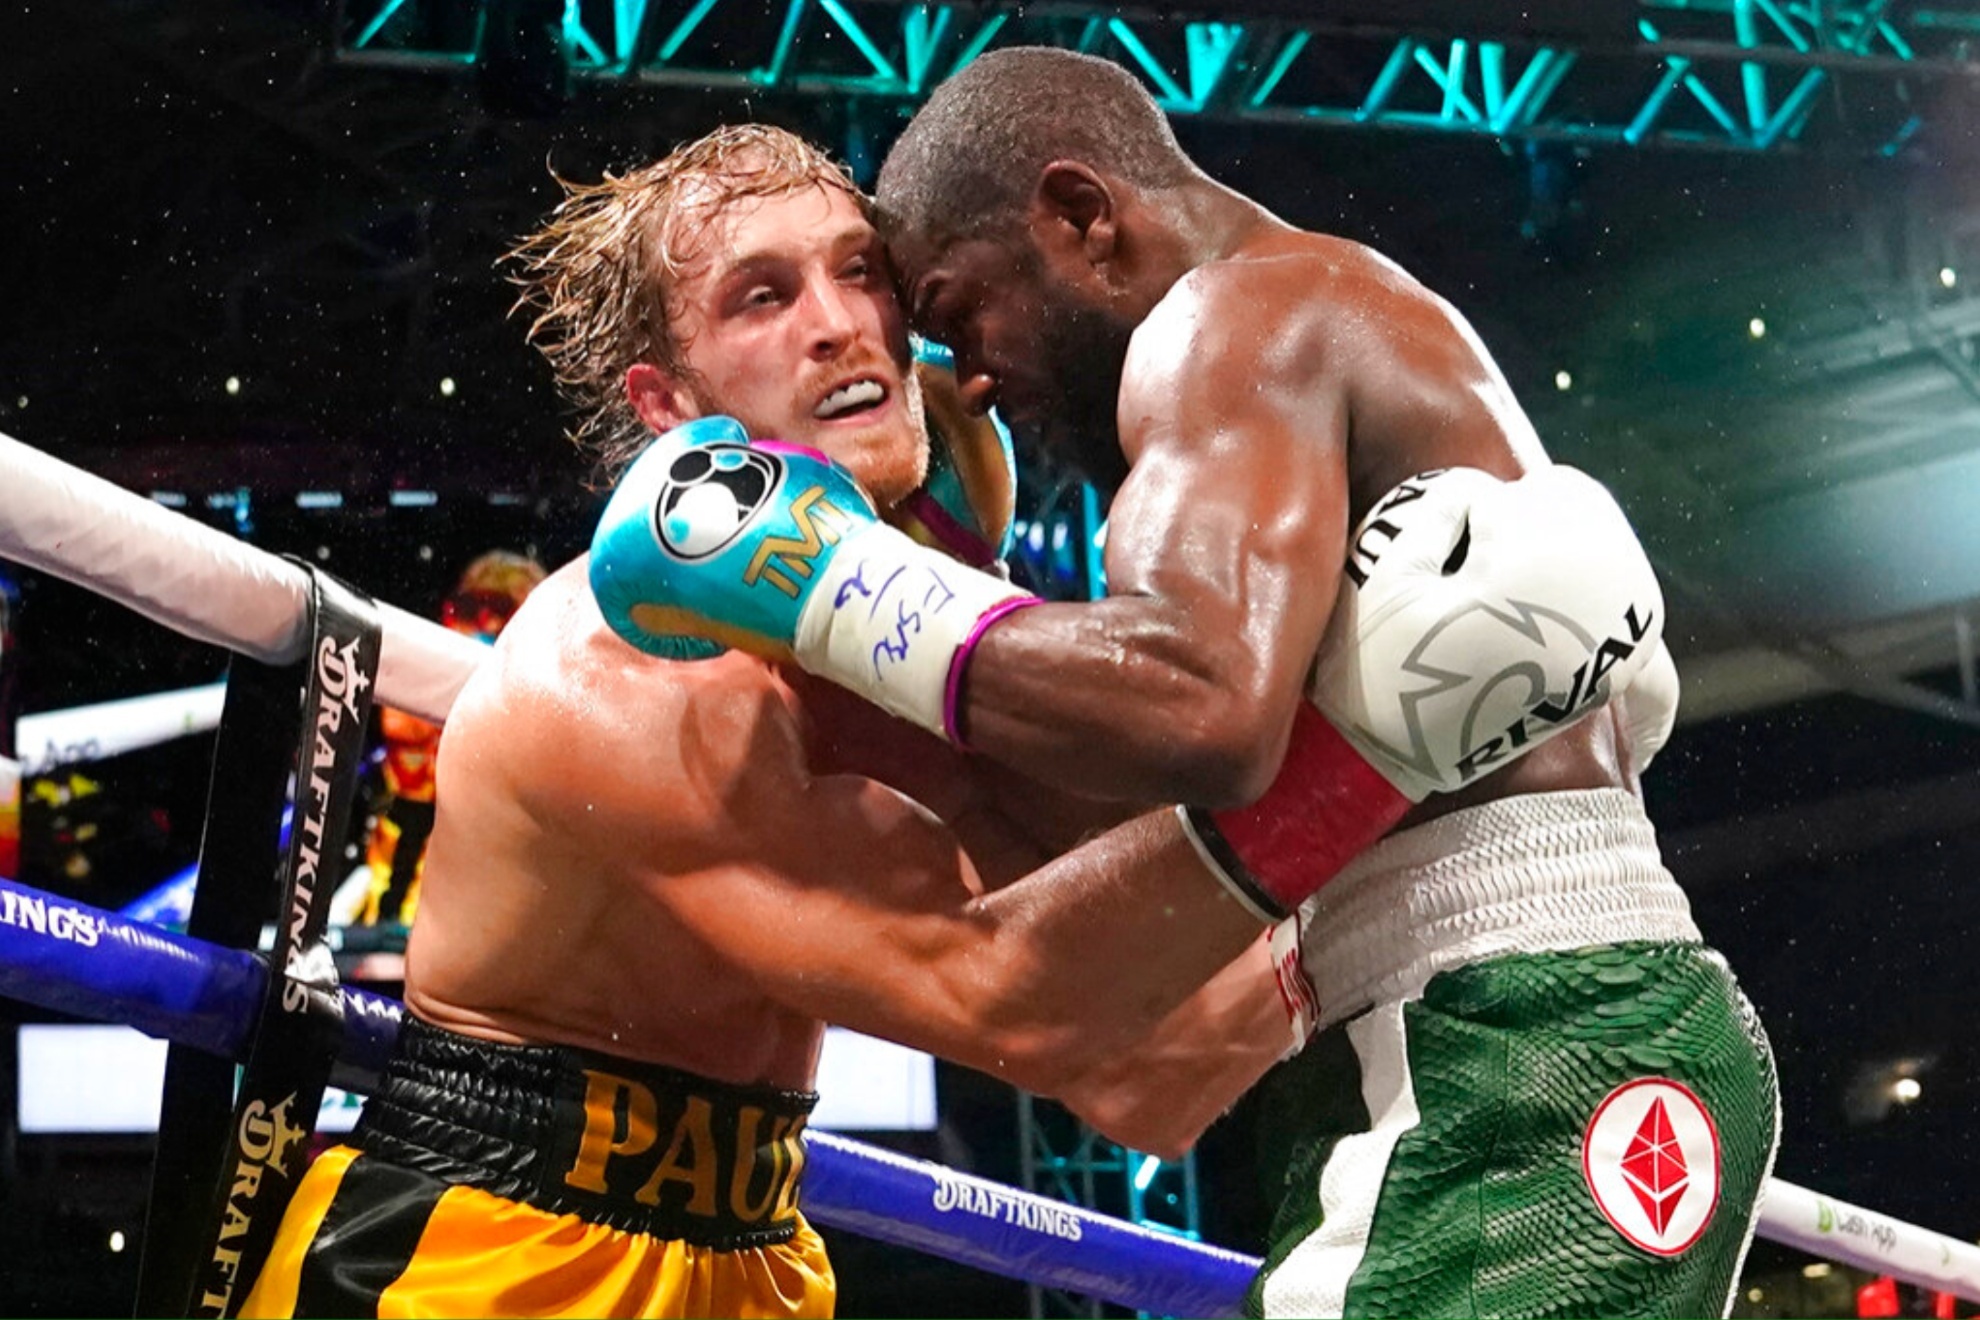 Logan Paul and Floyd Mayweather Jr. faced off in an exhibition fight in 2021.